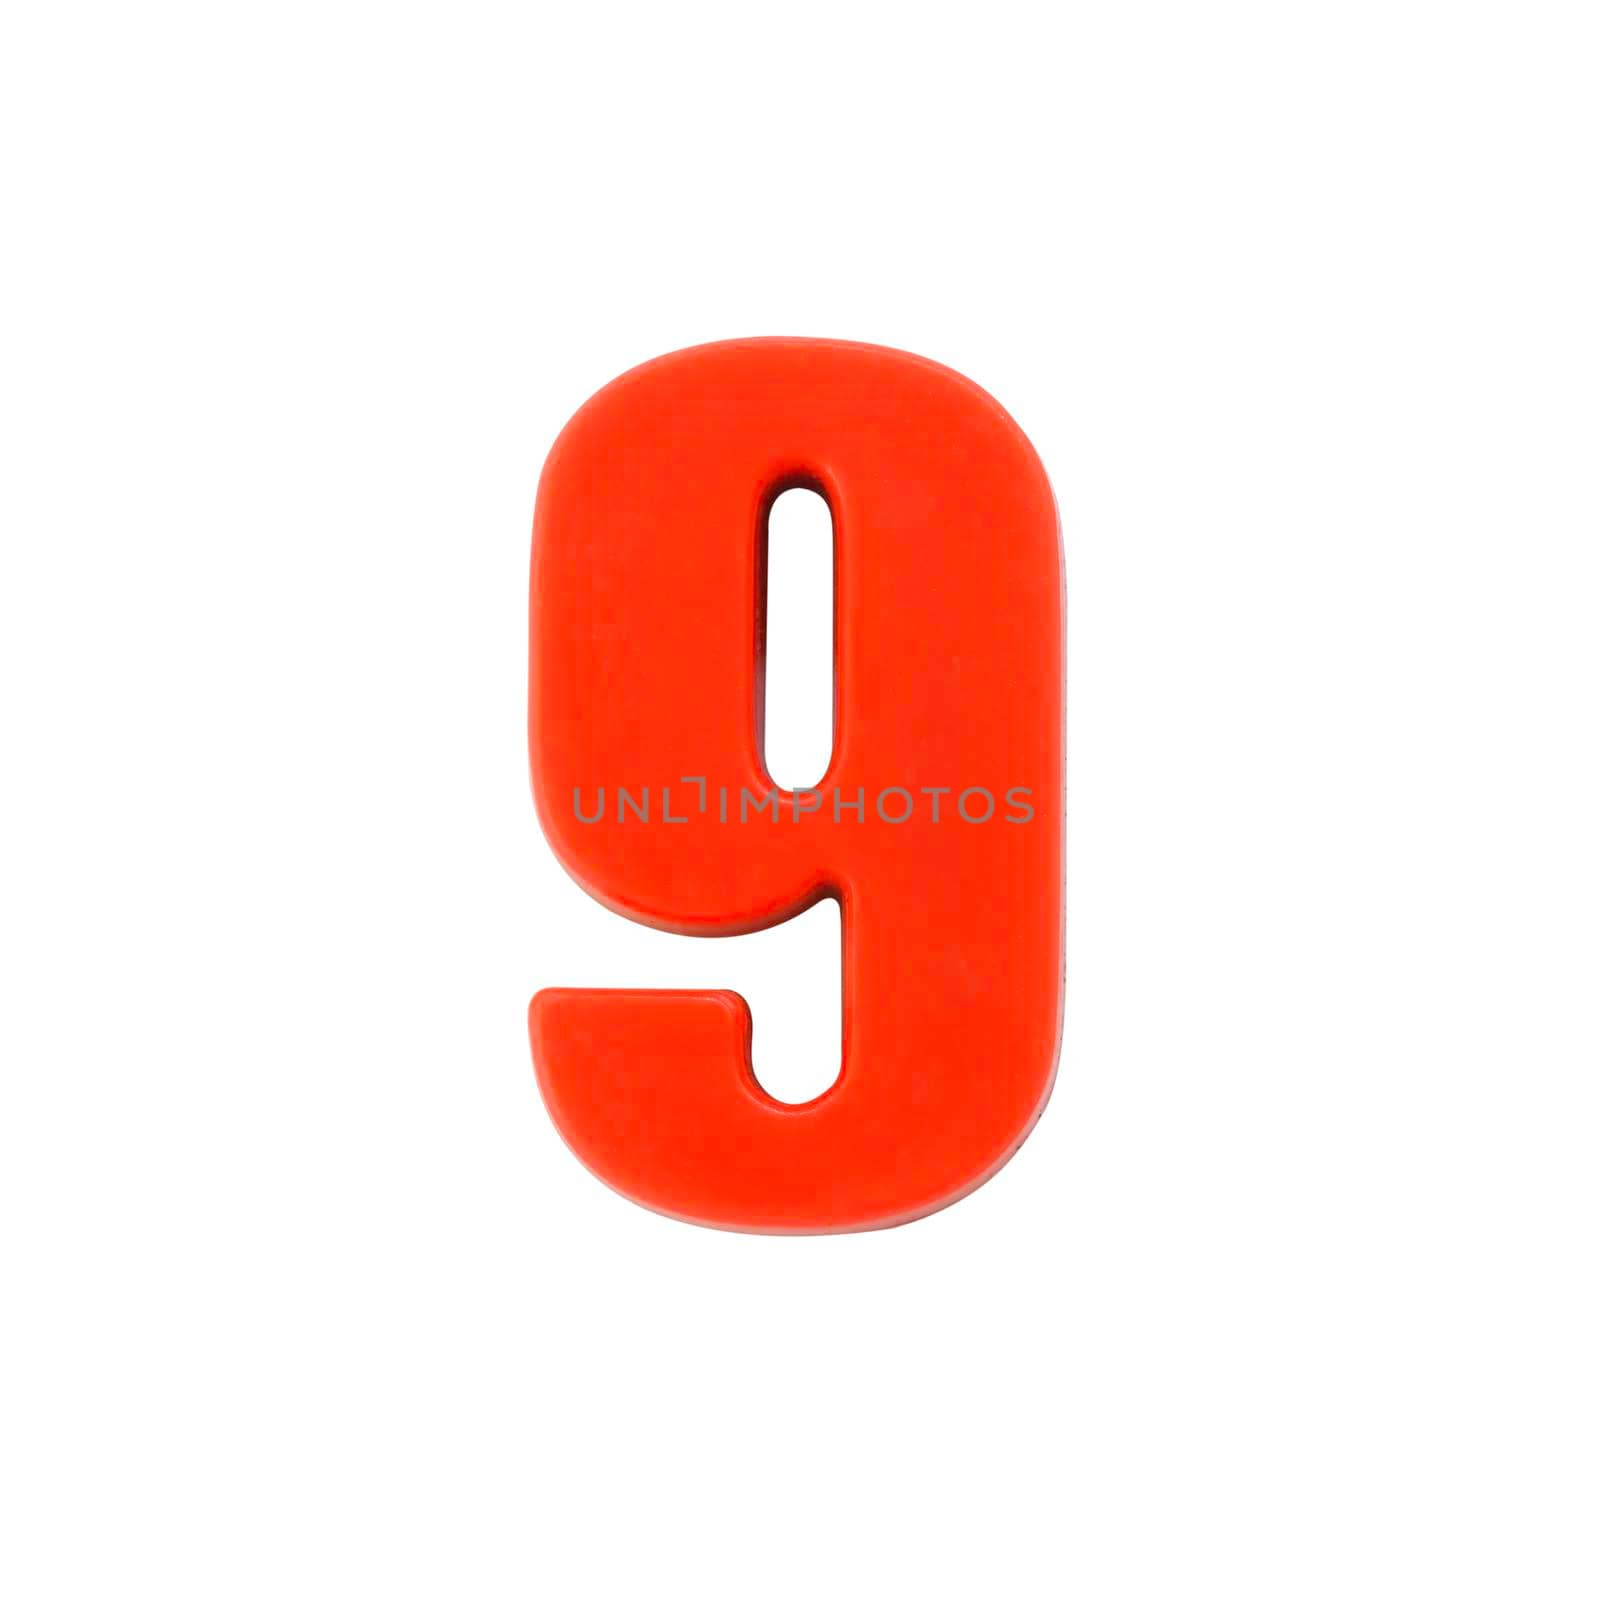 Shot of a number nine made of red plastic with clipping path by stoonn